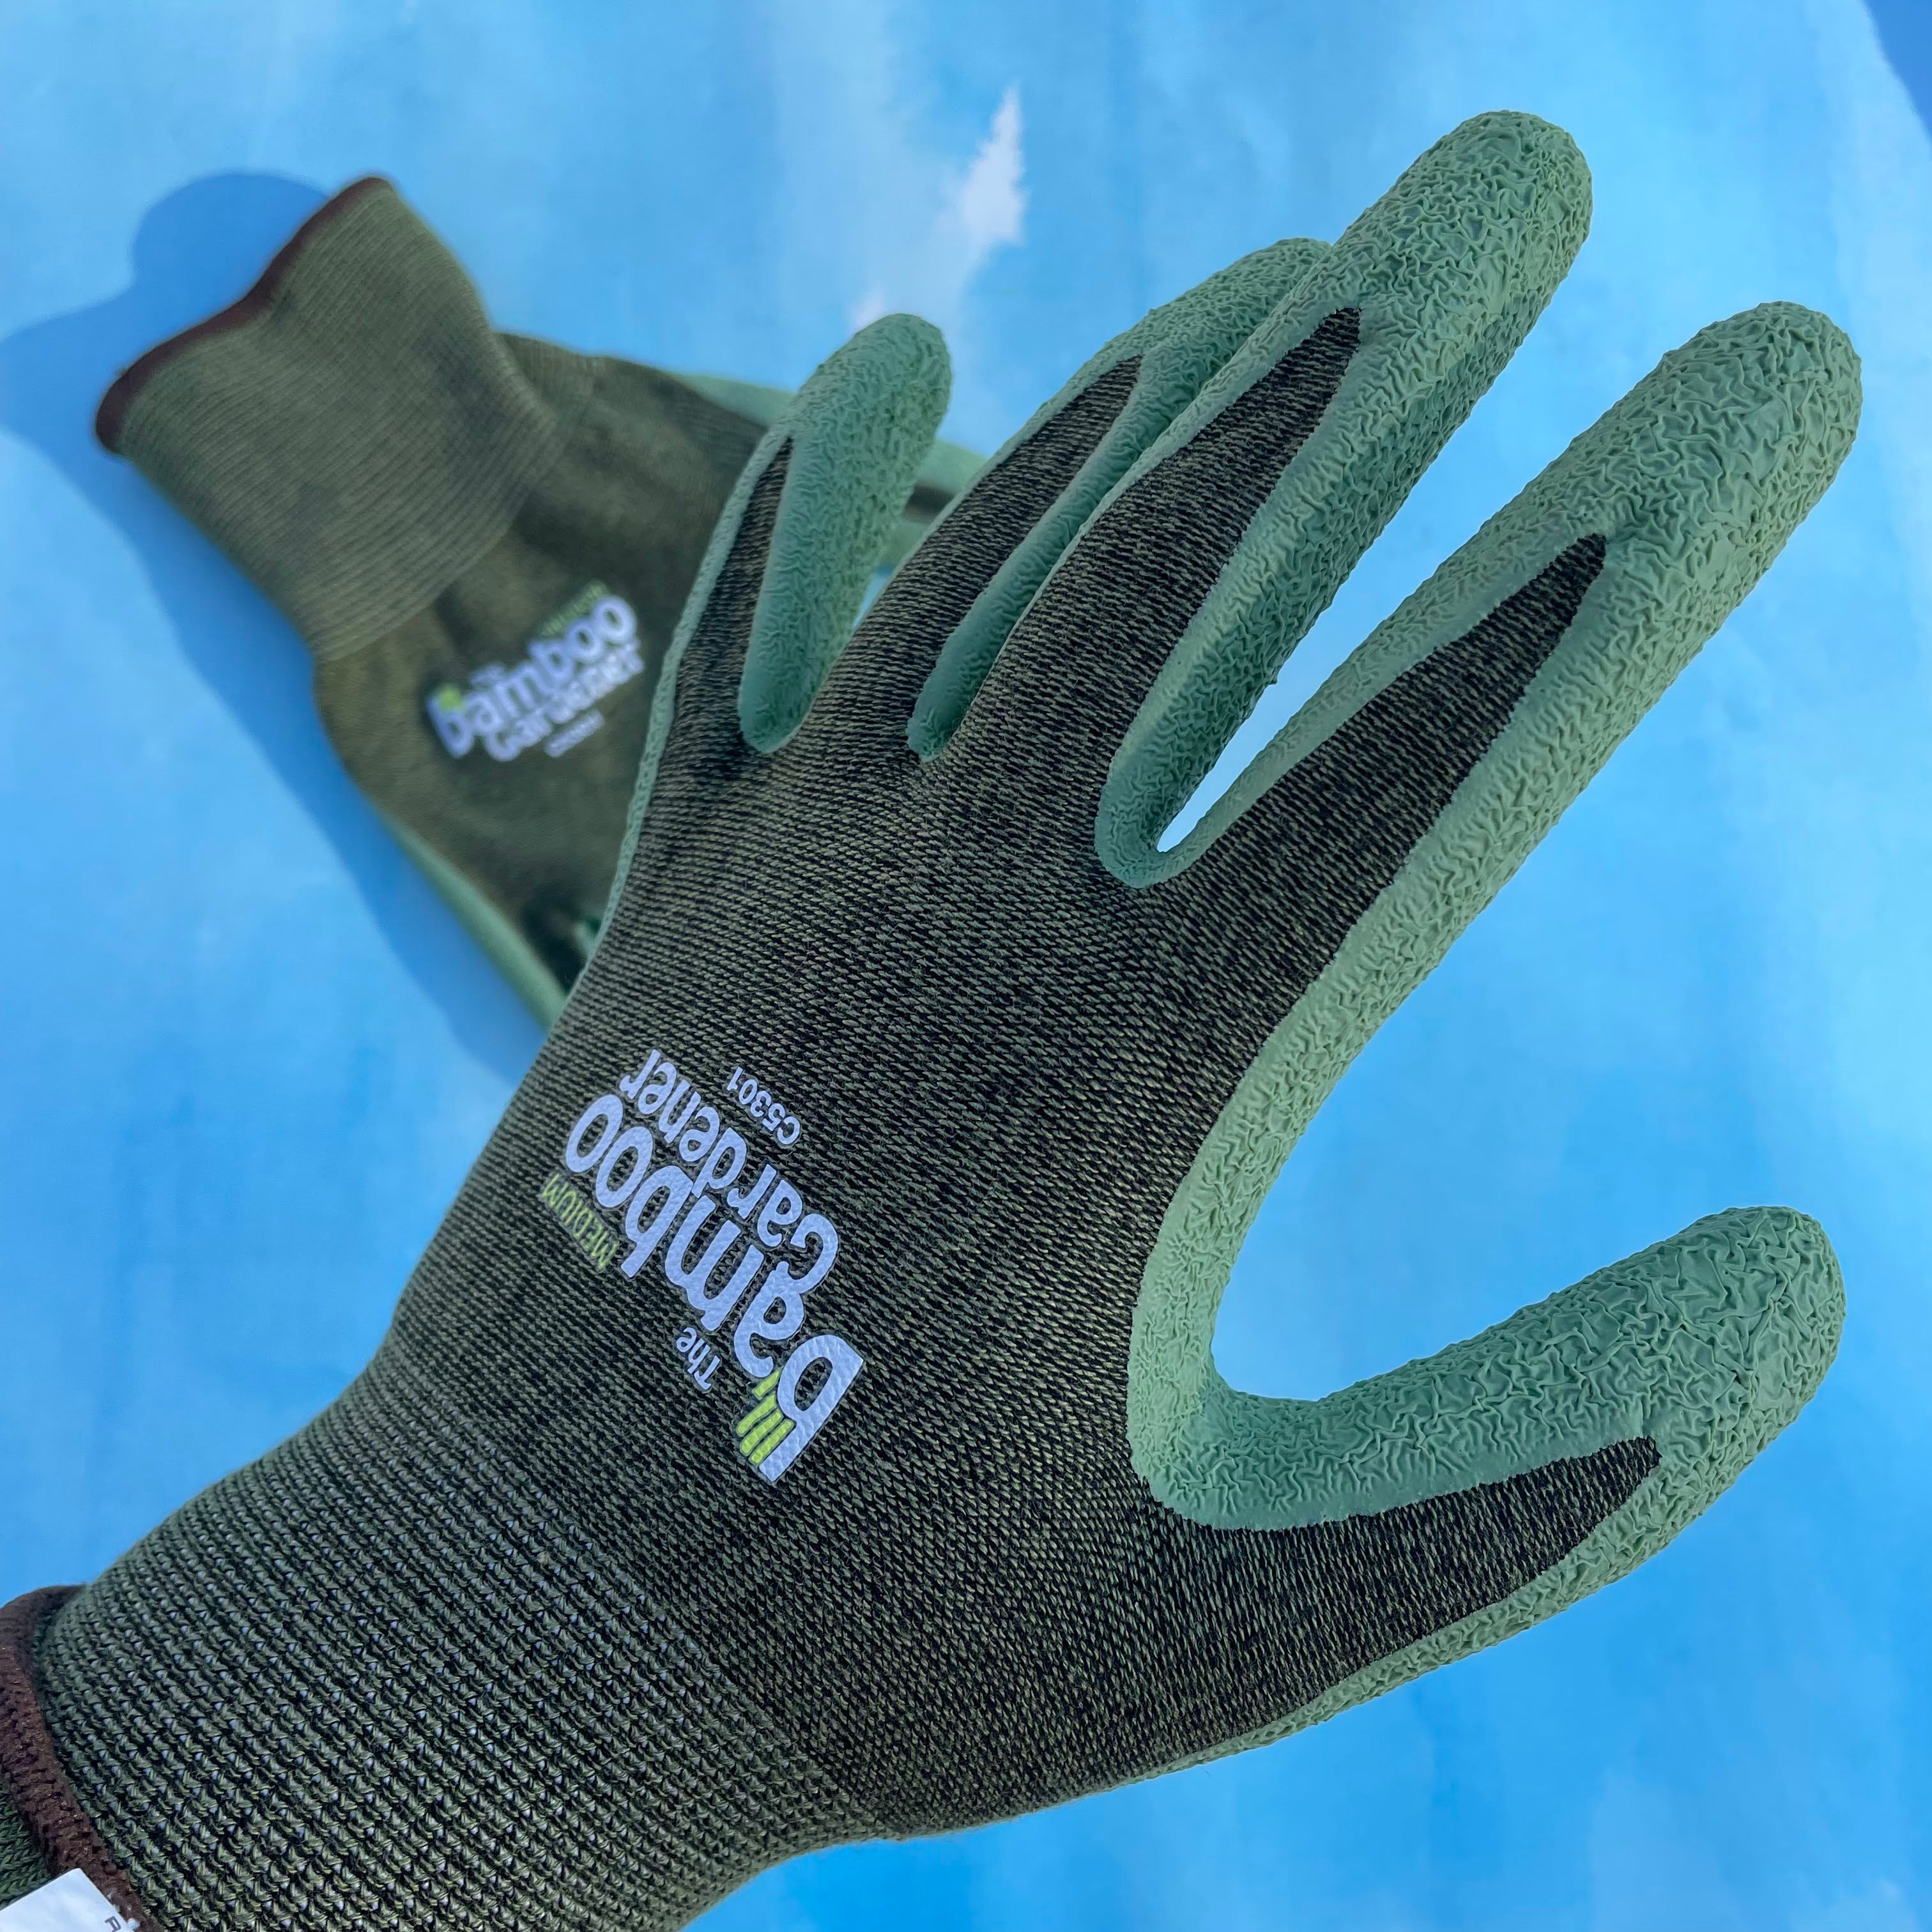 Bamboo Rayon Natural Rubber Palm Gloves